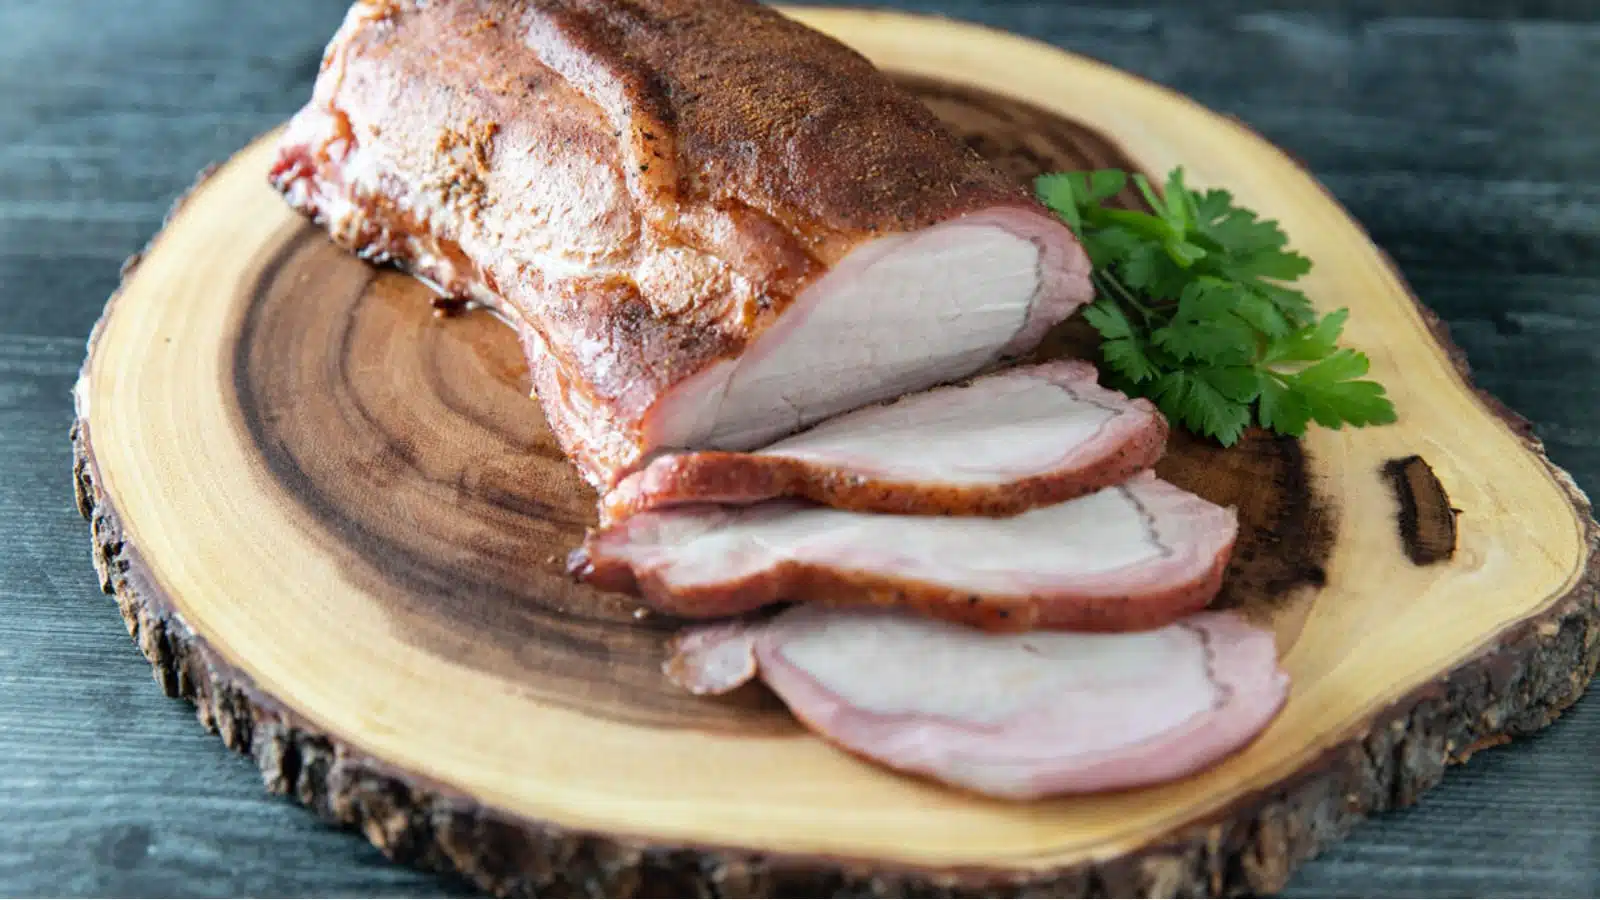 A wood tray with a pork loin on it with some parsley